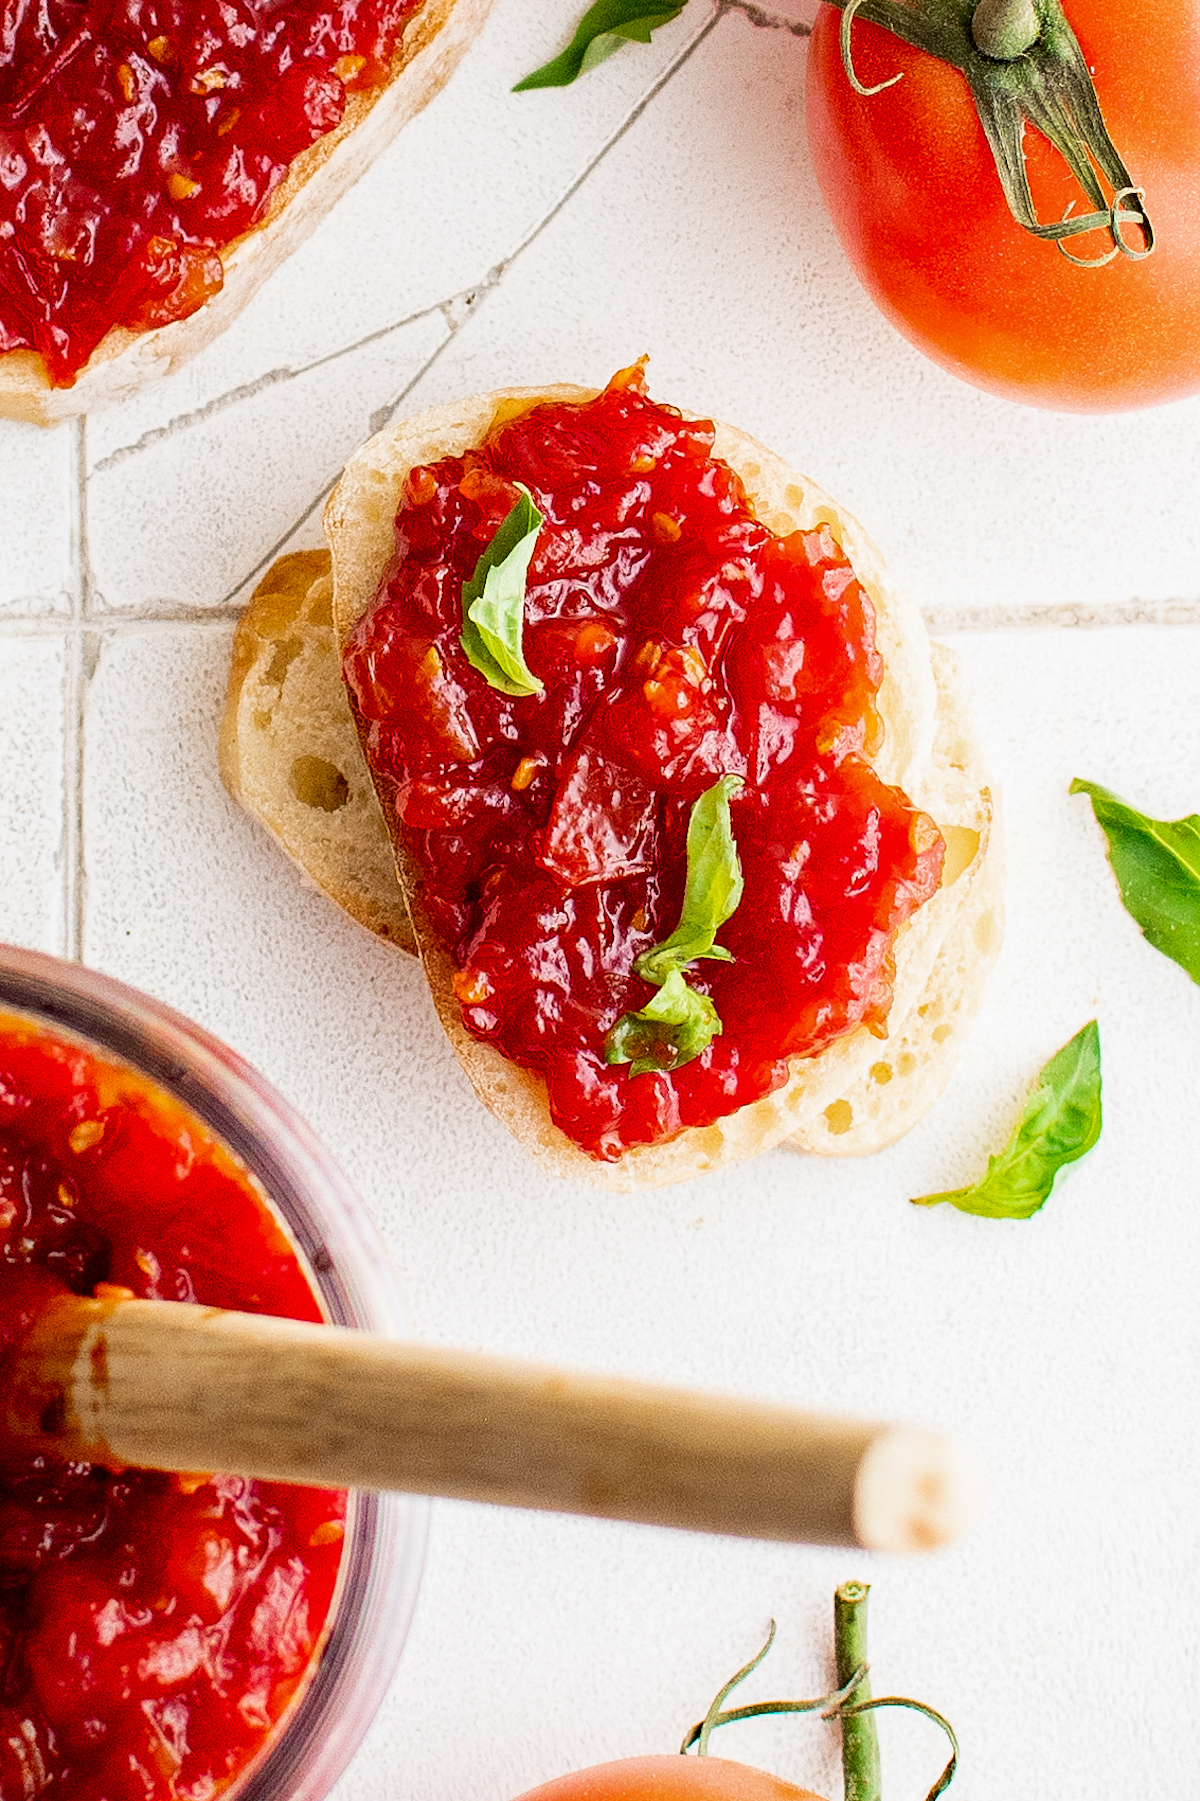 Tomato jam spread on bread, with sprigs of fresh basil leaves for garnish.